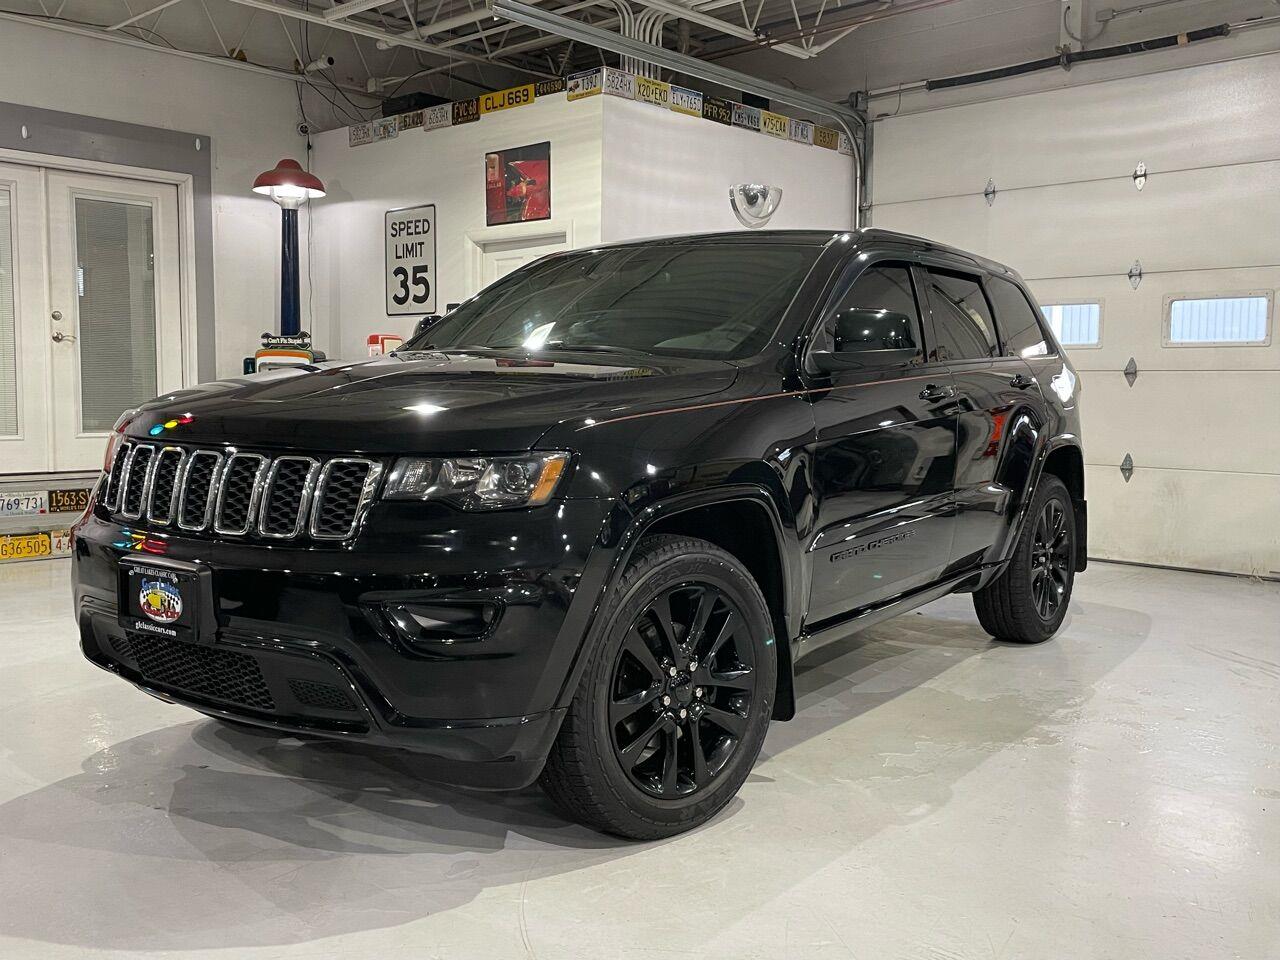 For Sale: 2018 Jeep Grand Cherokee in Hilton, New York for sale in Hilton, NY